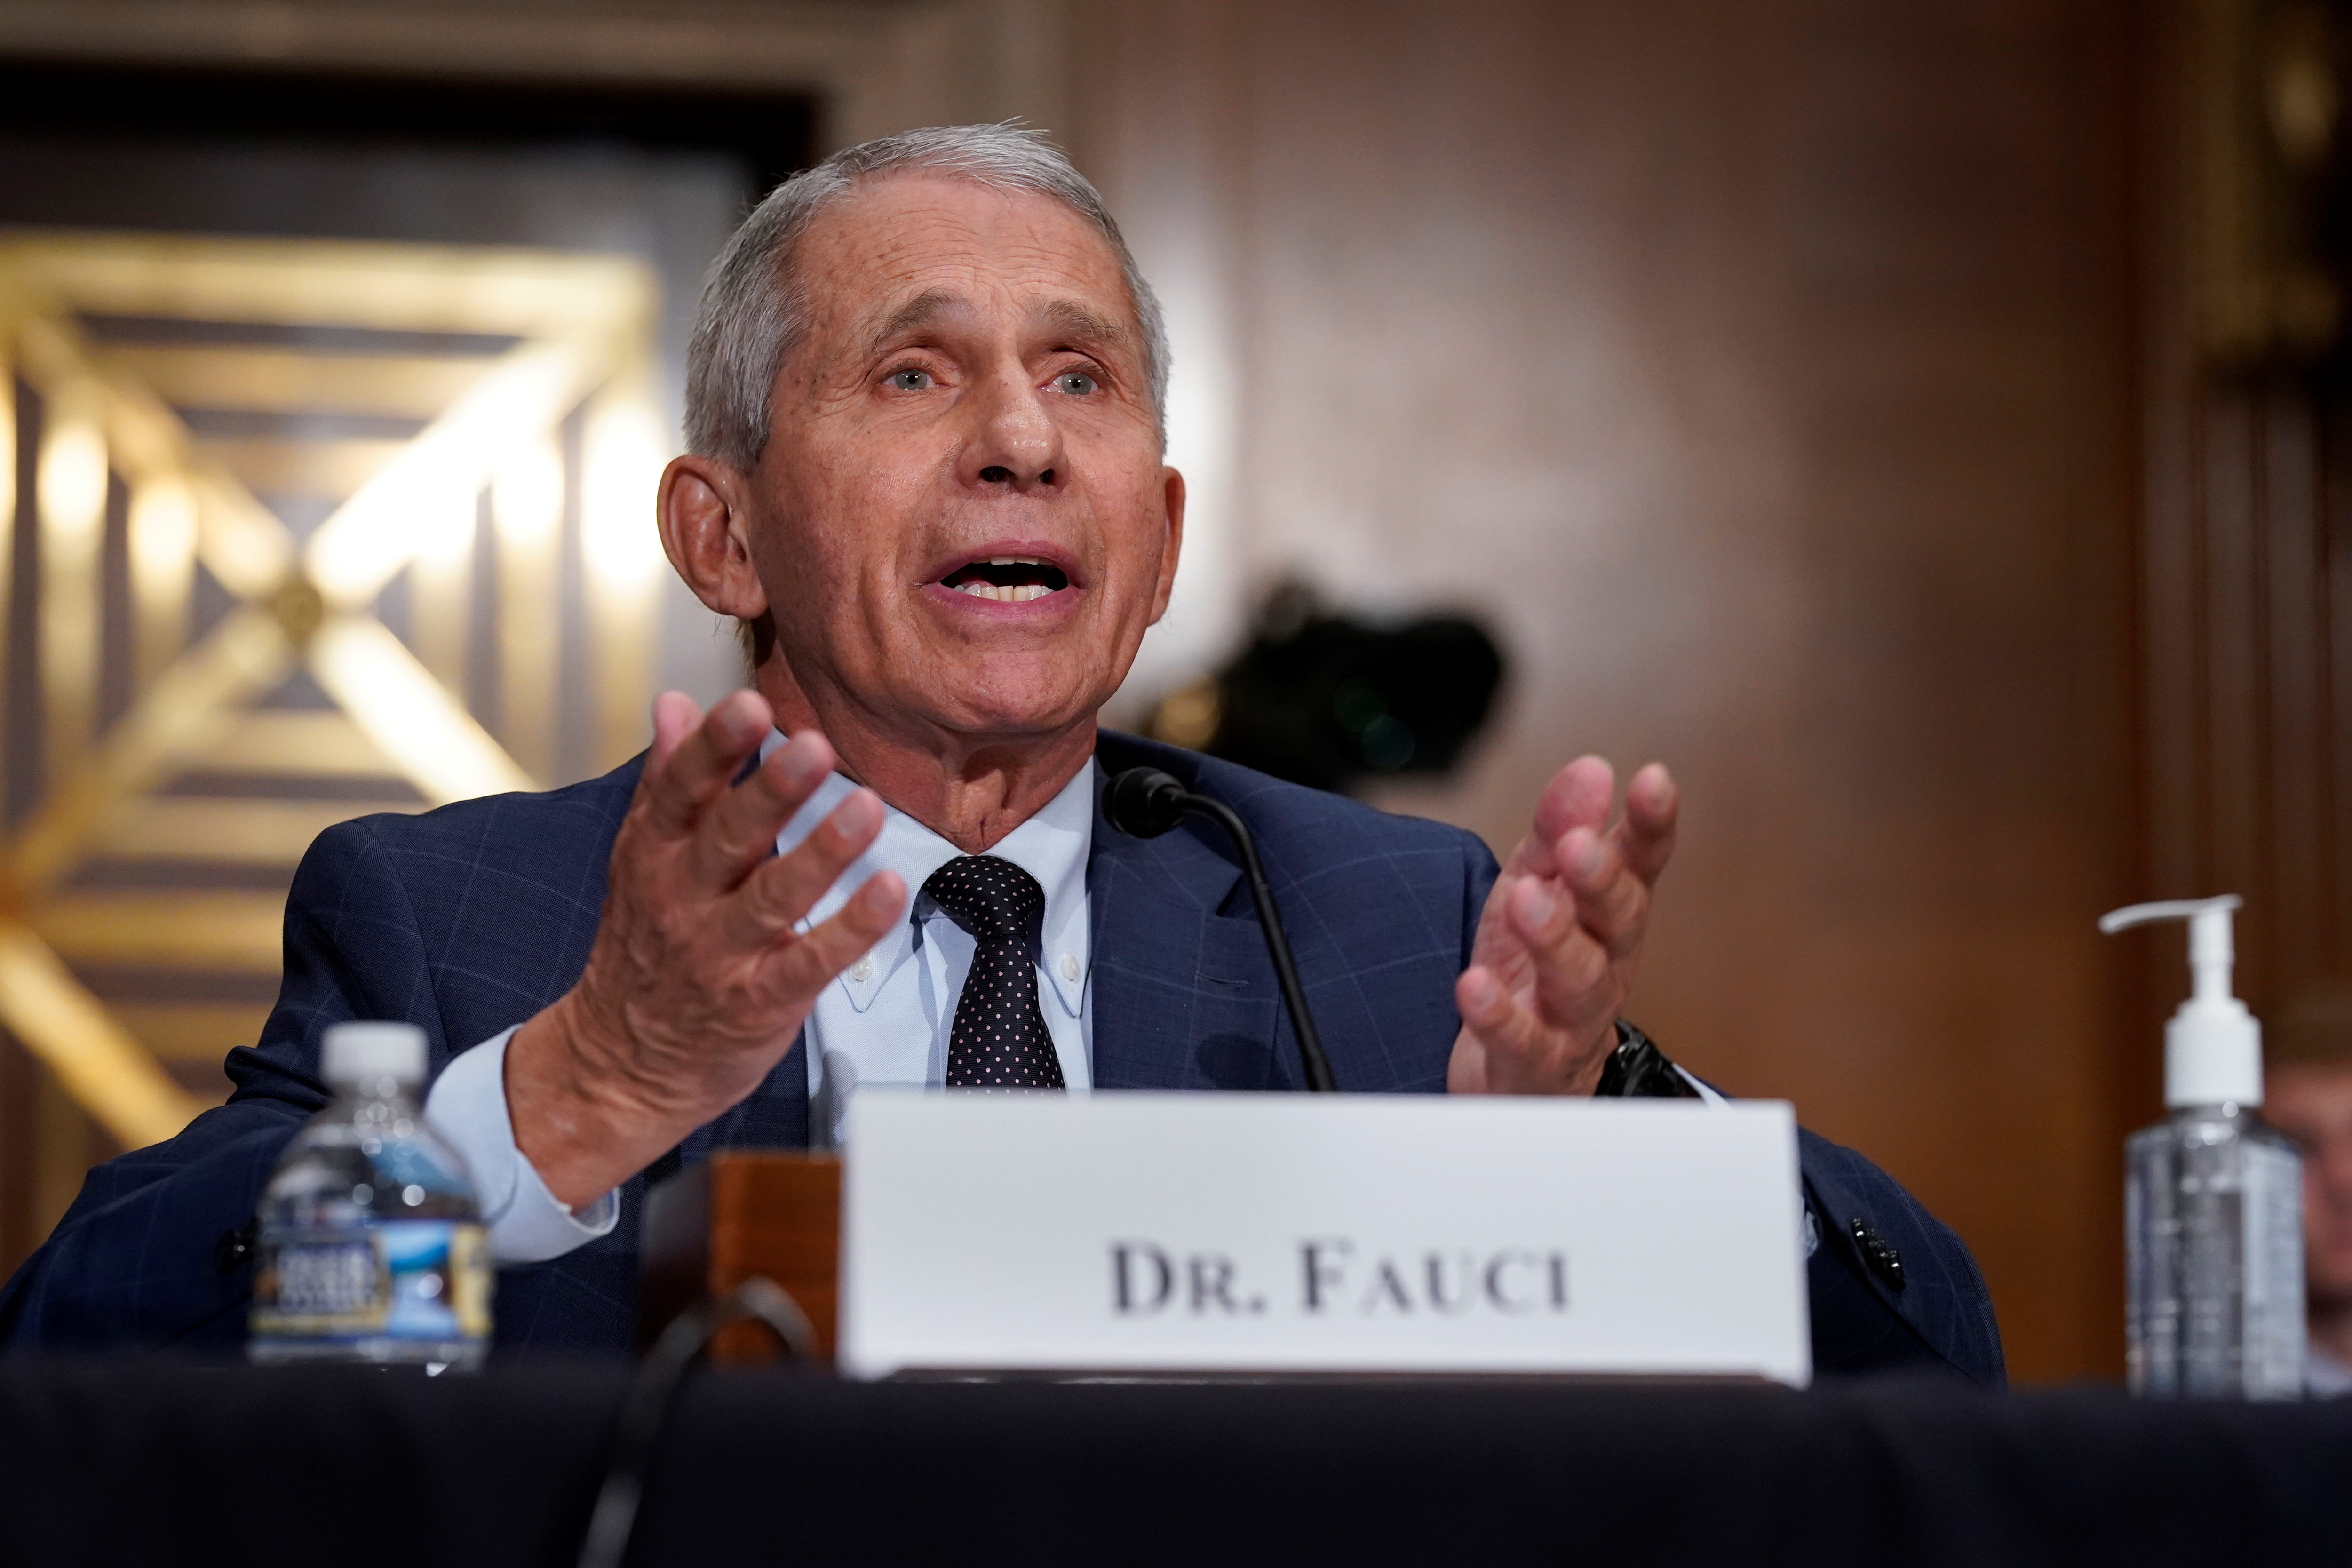 Top infectious disease expert Dr. Anthony Fauci responds to accusations by Sen. Rand Paul (R-KY) as he testifies before the Senate Health, Education, Labor, and Pensions Committee on Capitol hill in Washington, D.C., U.S., July 20, 2021.  J. Scott Applewhite/Pool via REUTERS